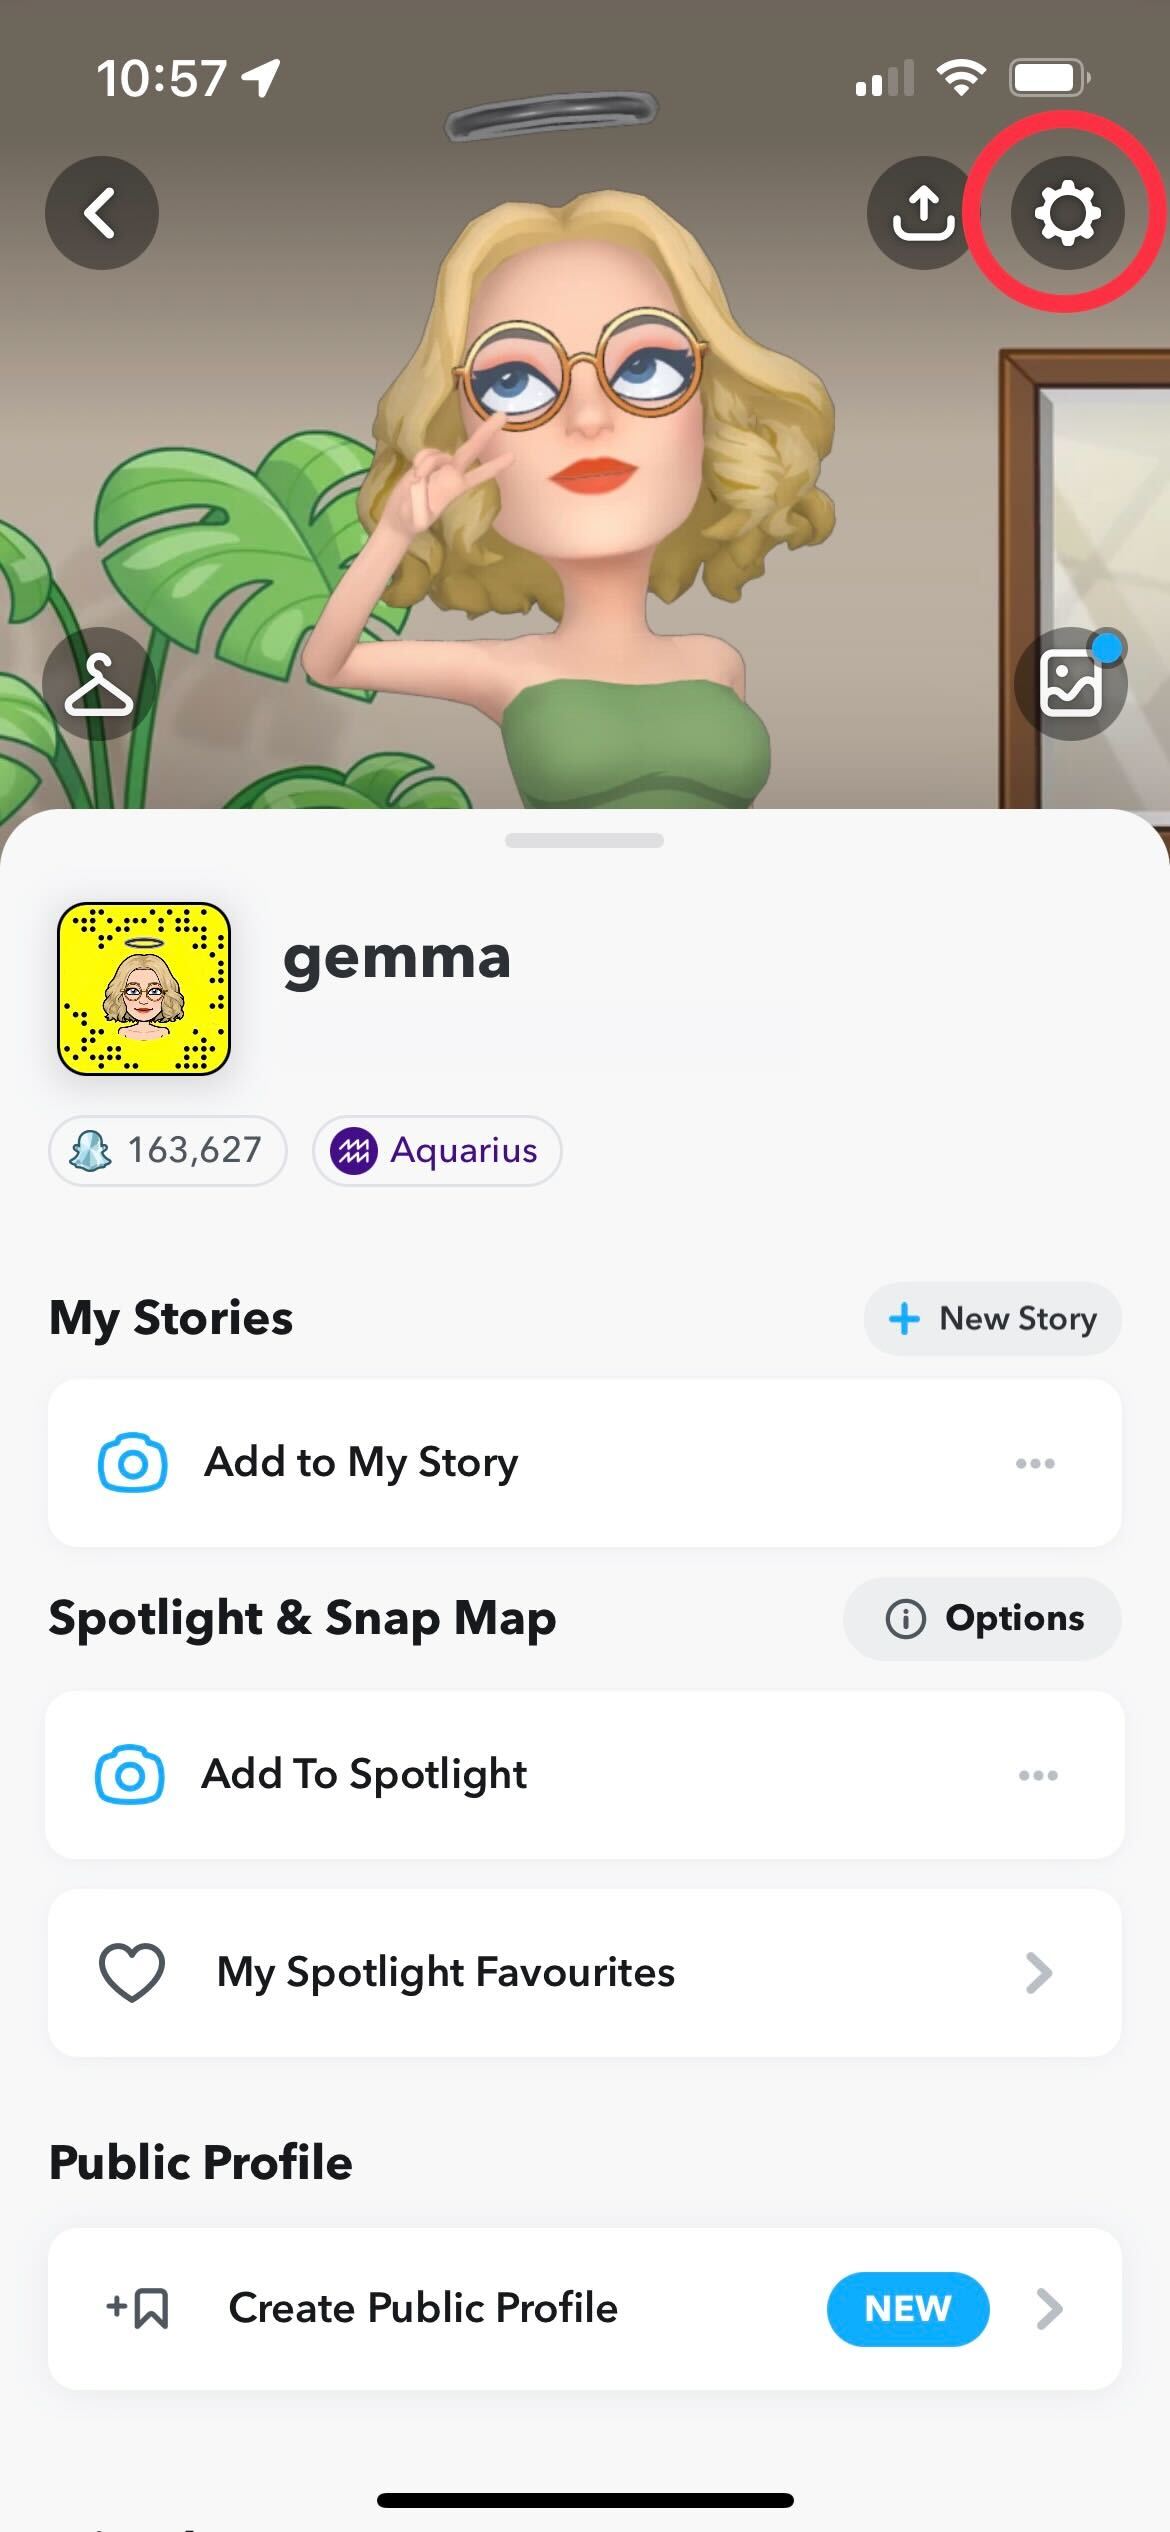 Take a look at your Bitmoji page